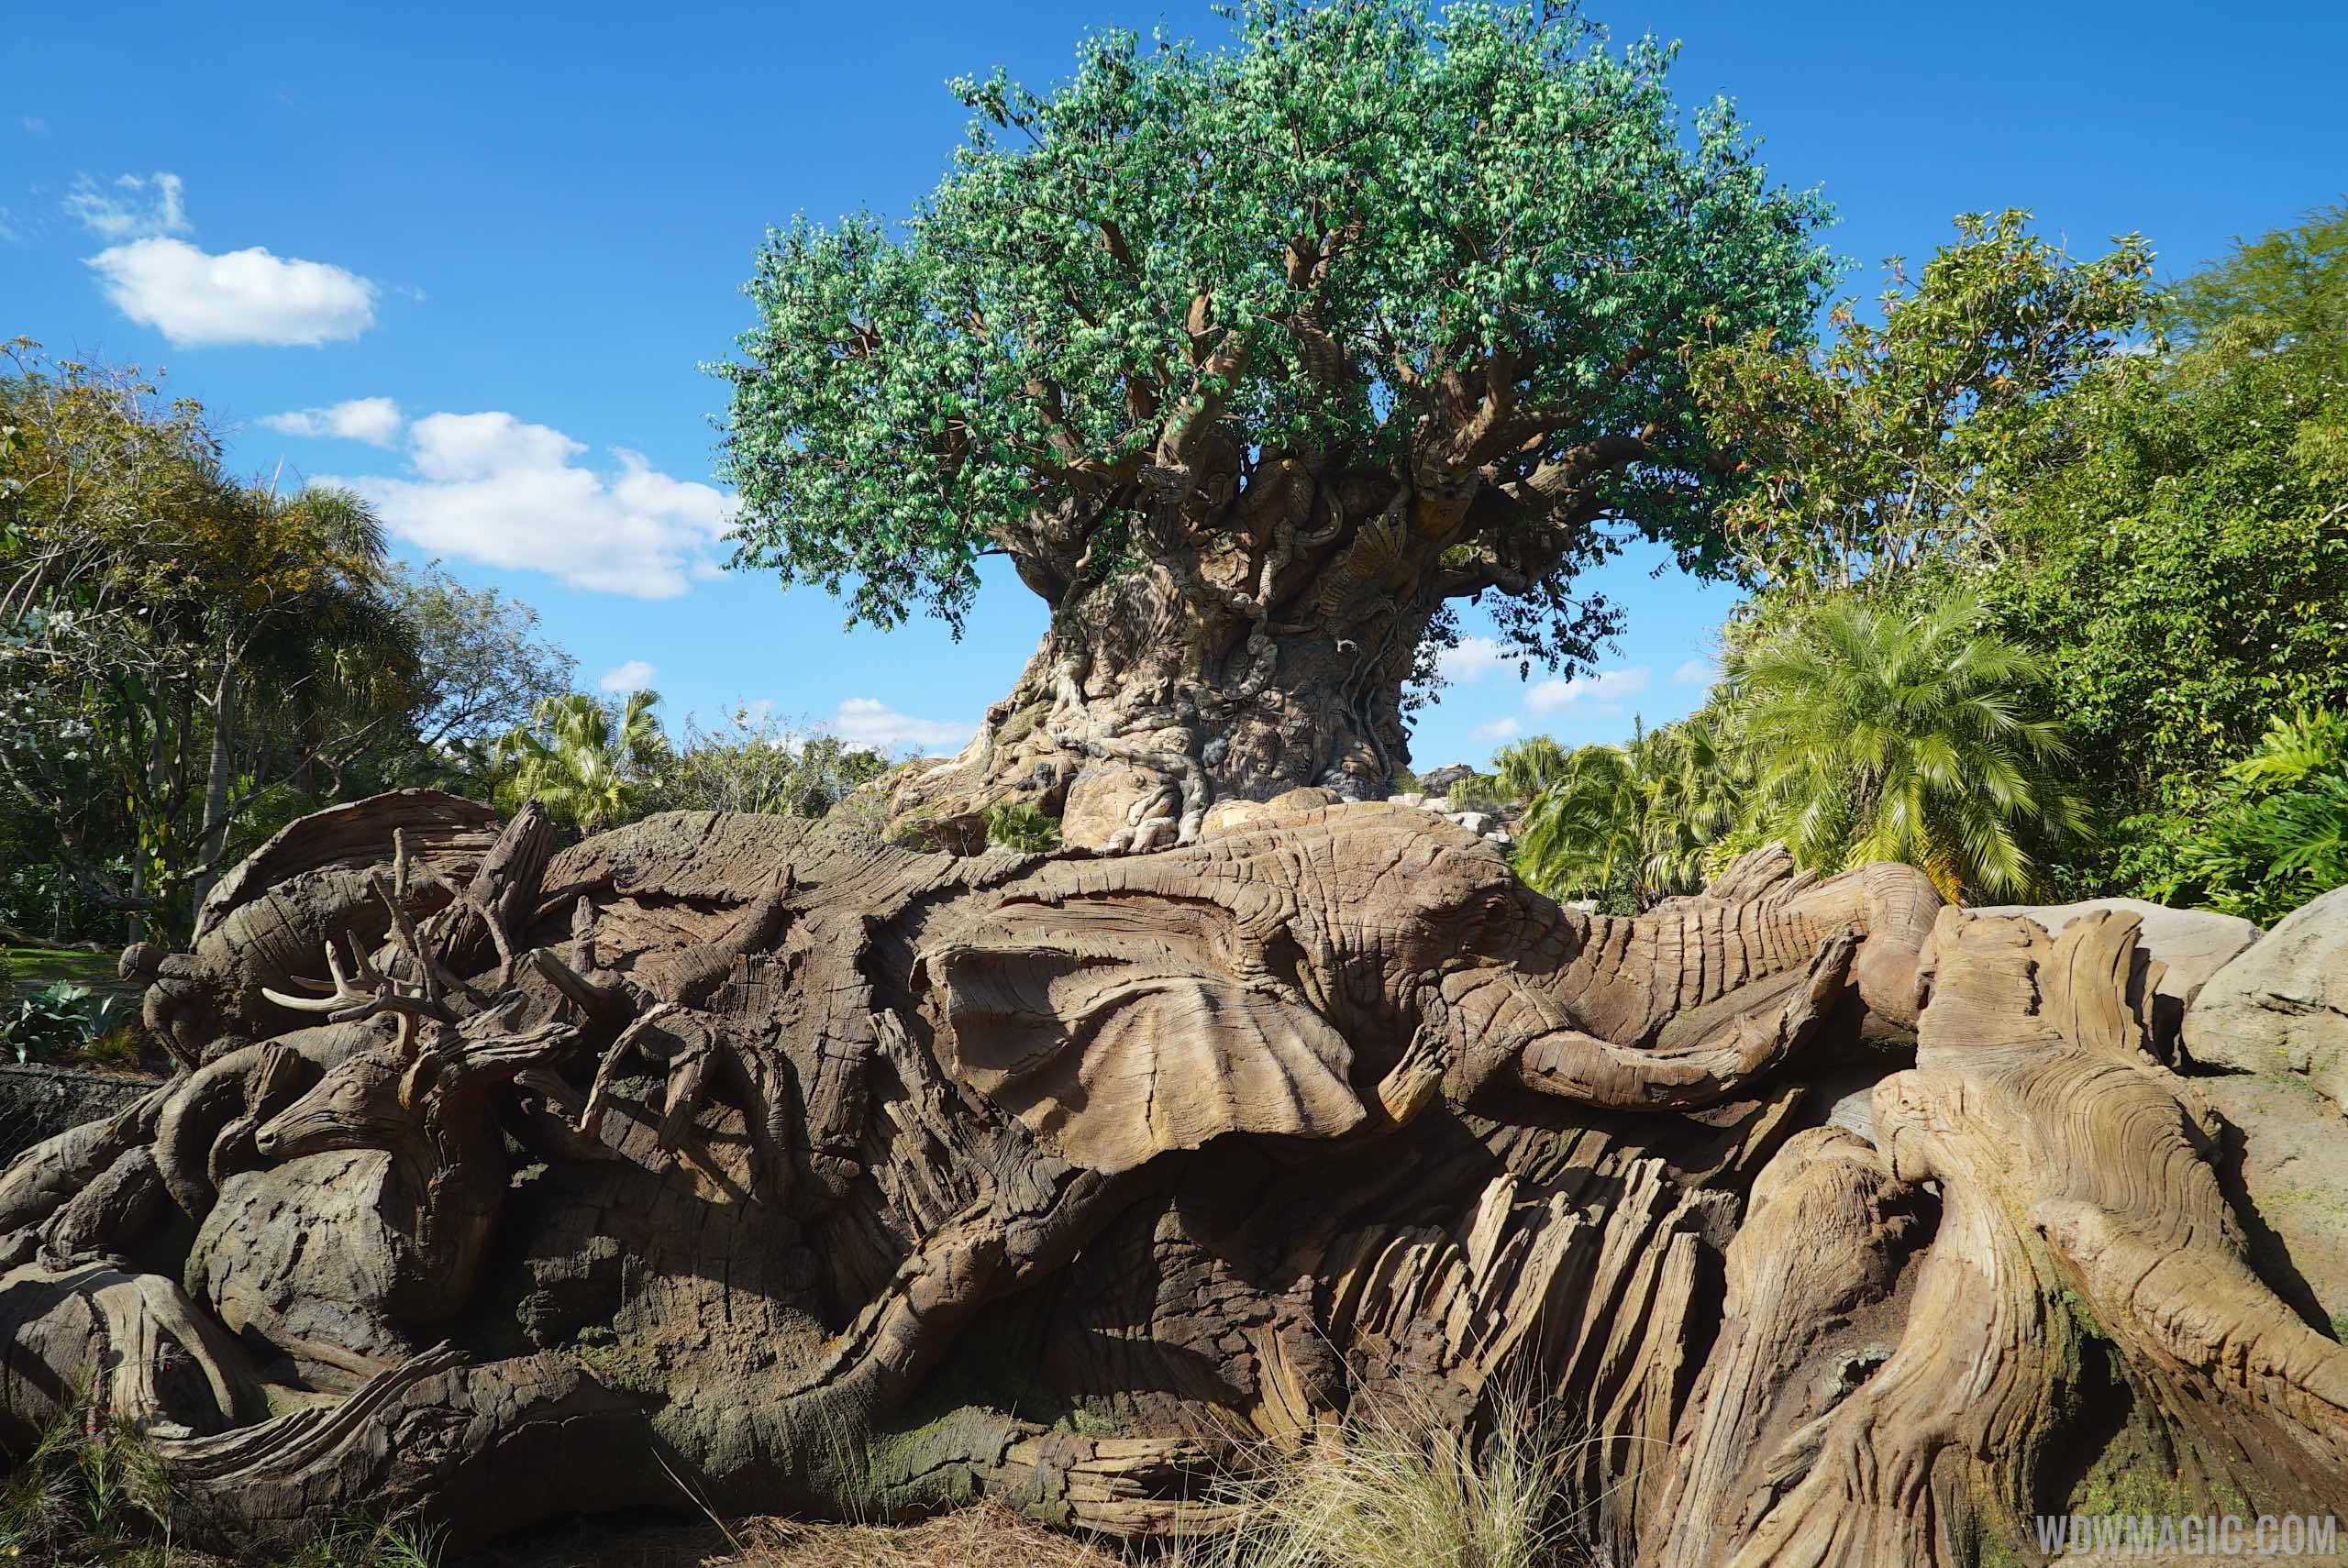 PHOTOS and VIDEO - New roots expand the Tree of Life at Disney's Animal Kingdom